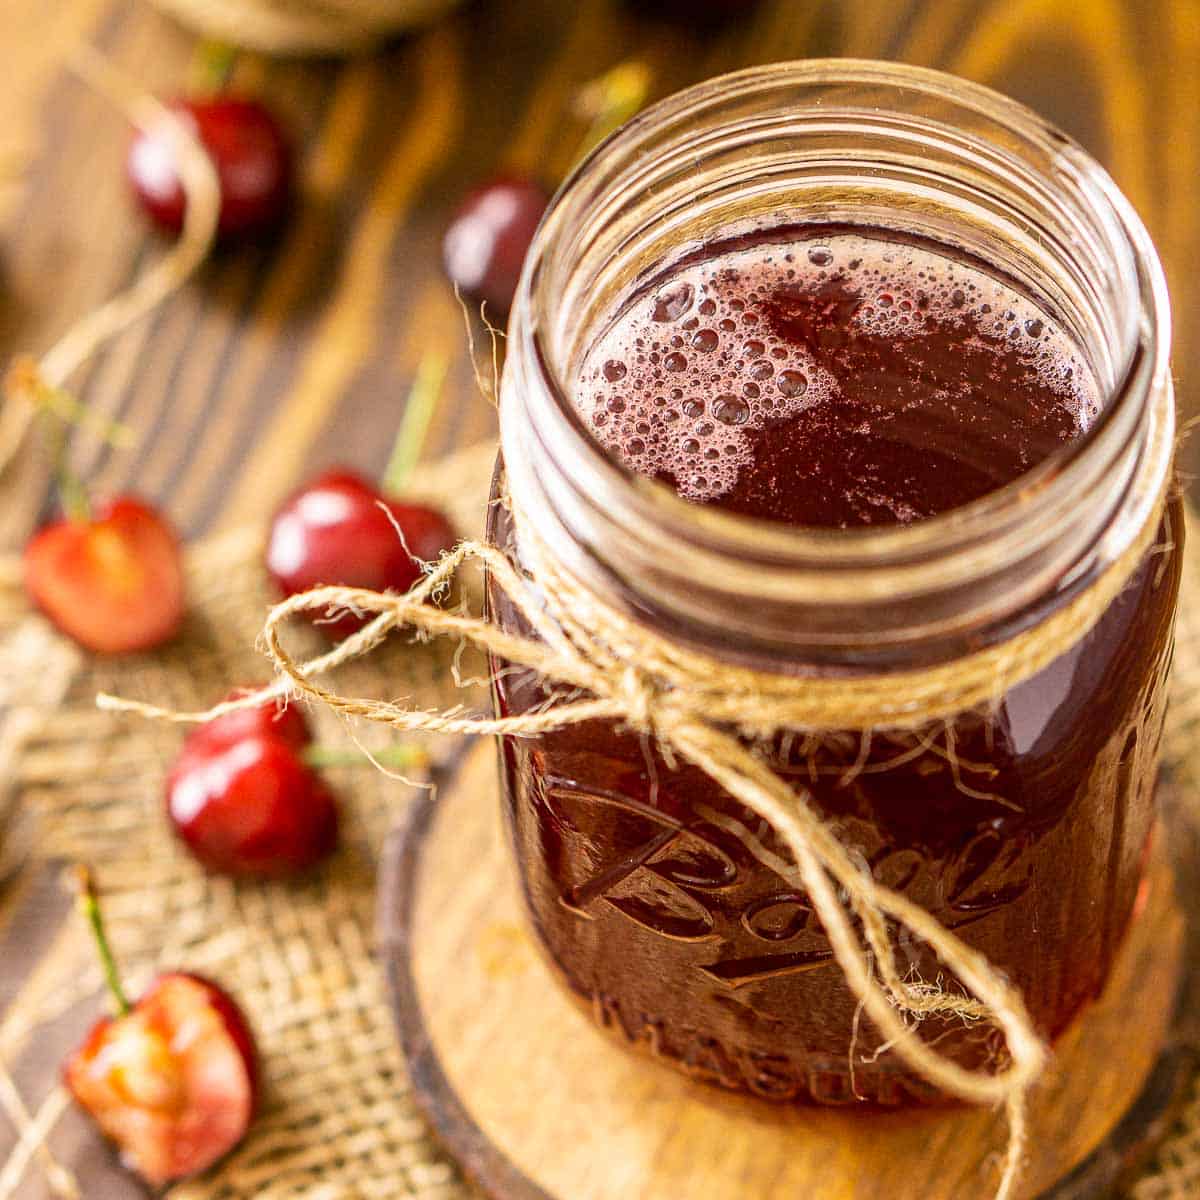 A jar of cherry simple syrup on a wooden coaster with real cherries to the left.